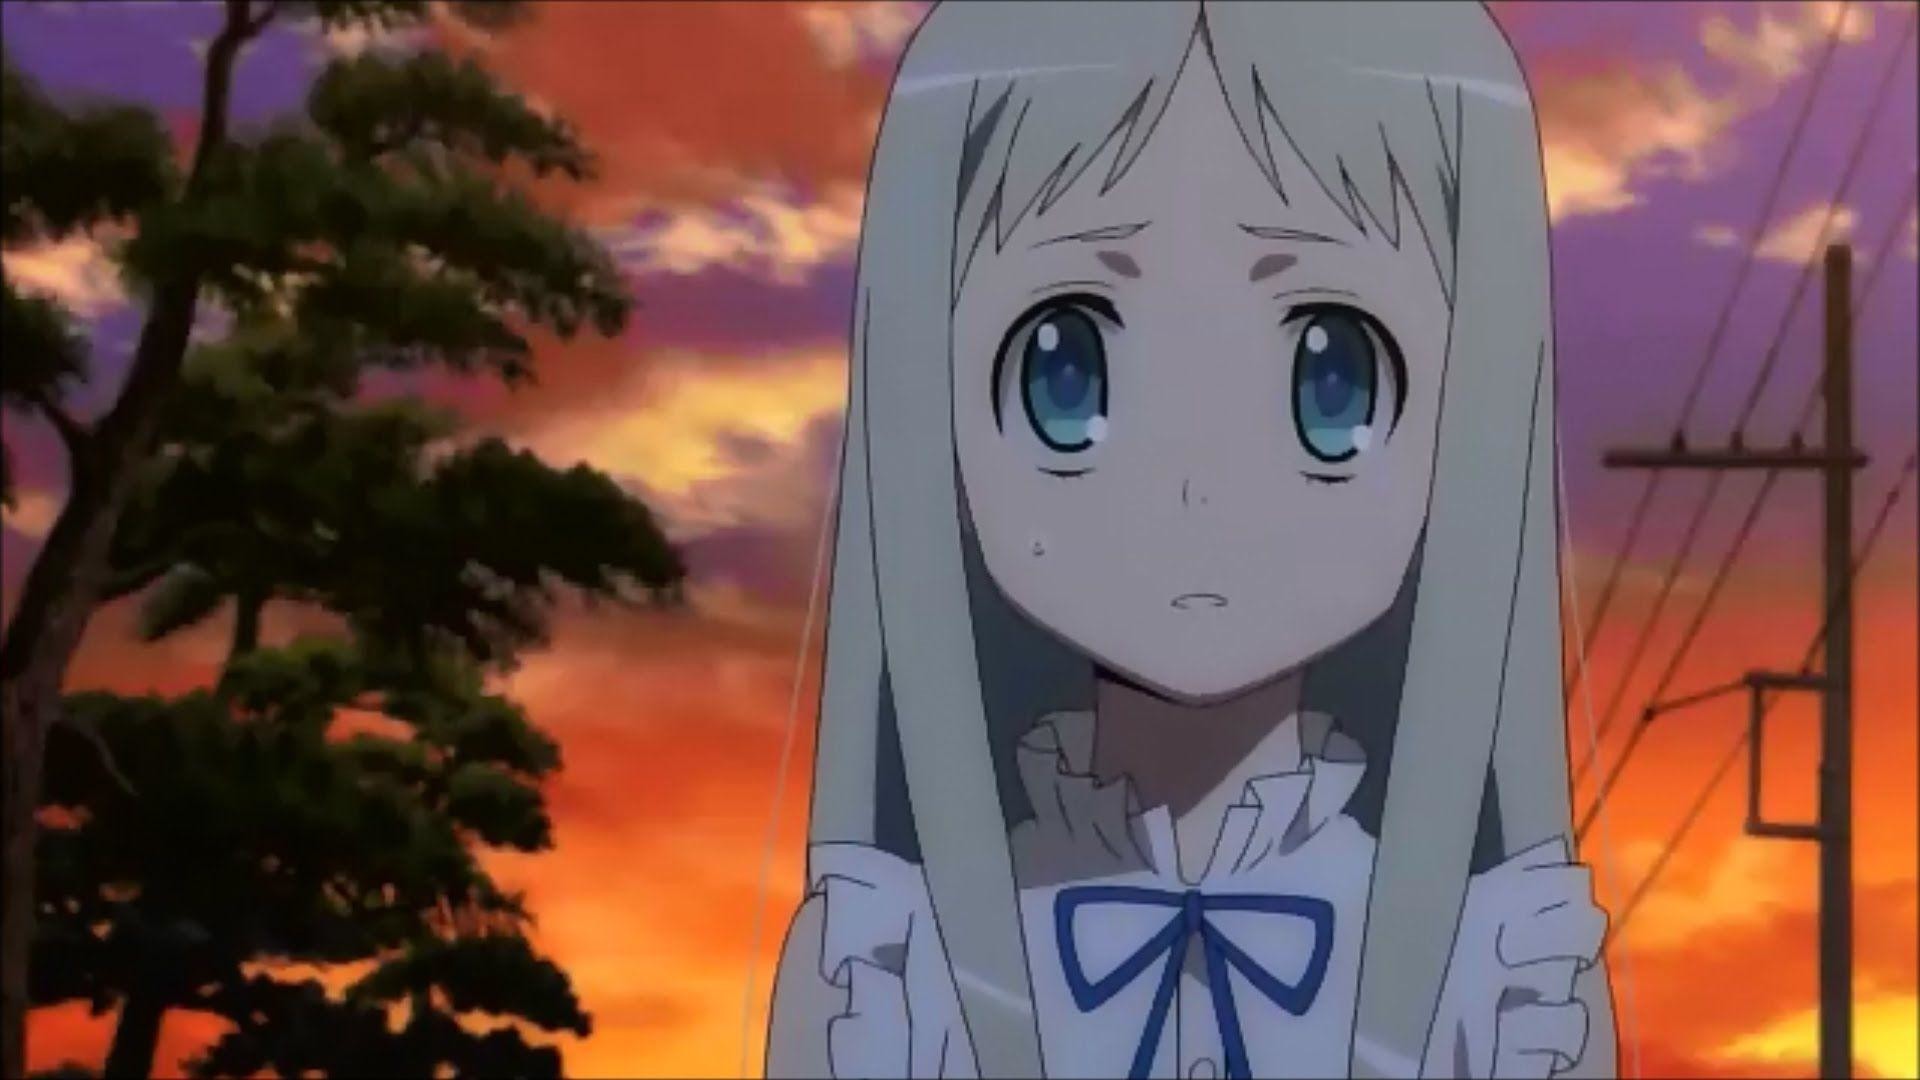 1920x1080 Anohana The Flower We Saw That Day Trailer Hd Eng Sub You. Anohana The  Flower We Saw That Day Wallpapers Wallpaper Cave